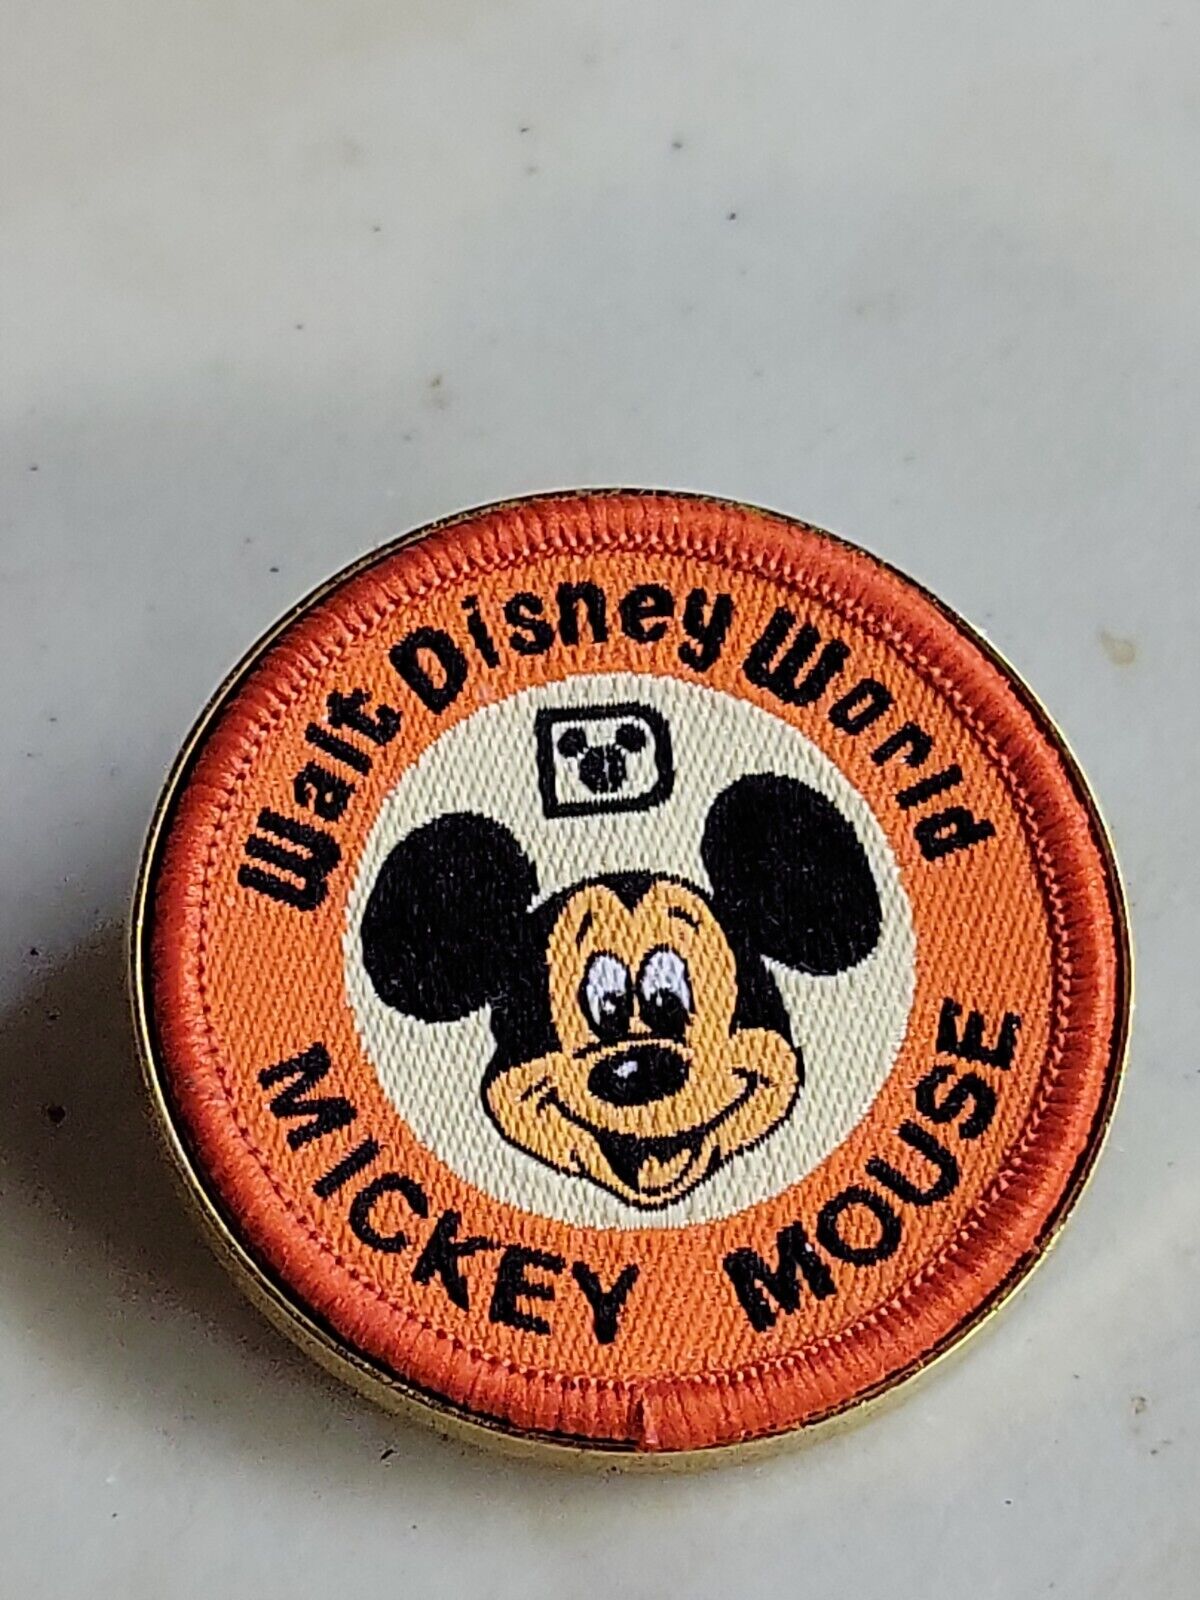 DISNEY 2011 FLORIDA PROJECT EVENT WDW MICKEY MOUSE PATCH PIN LE 750